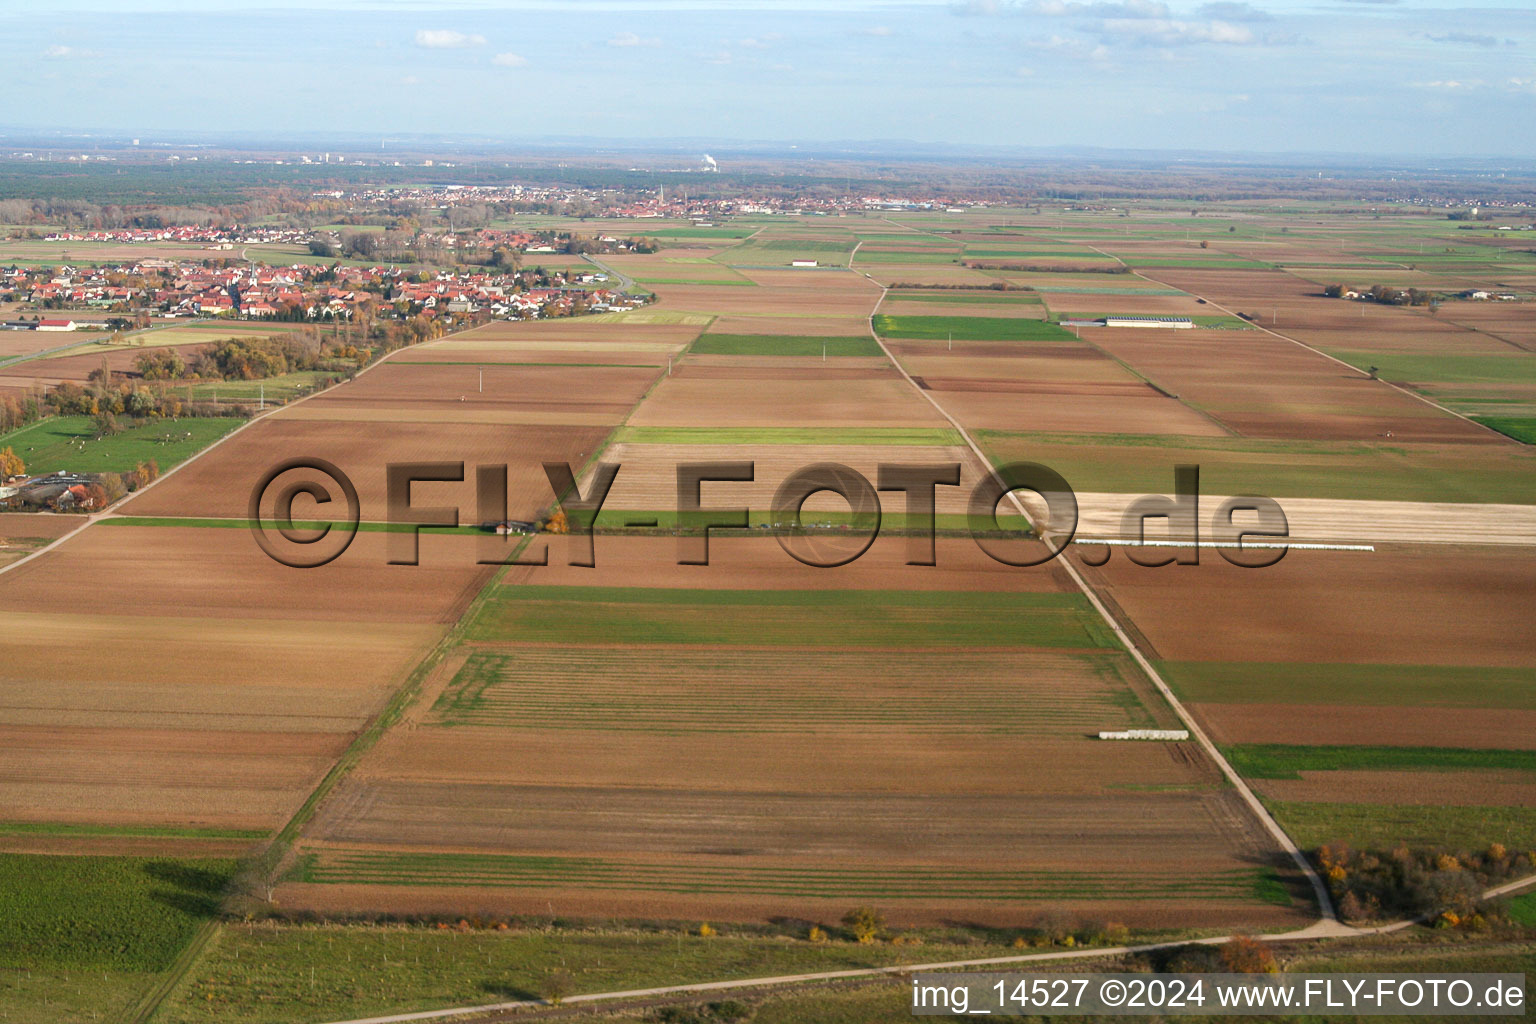 Model airfield in Offenbach an der Queich in the state Rhineland-Palatinate, Germany